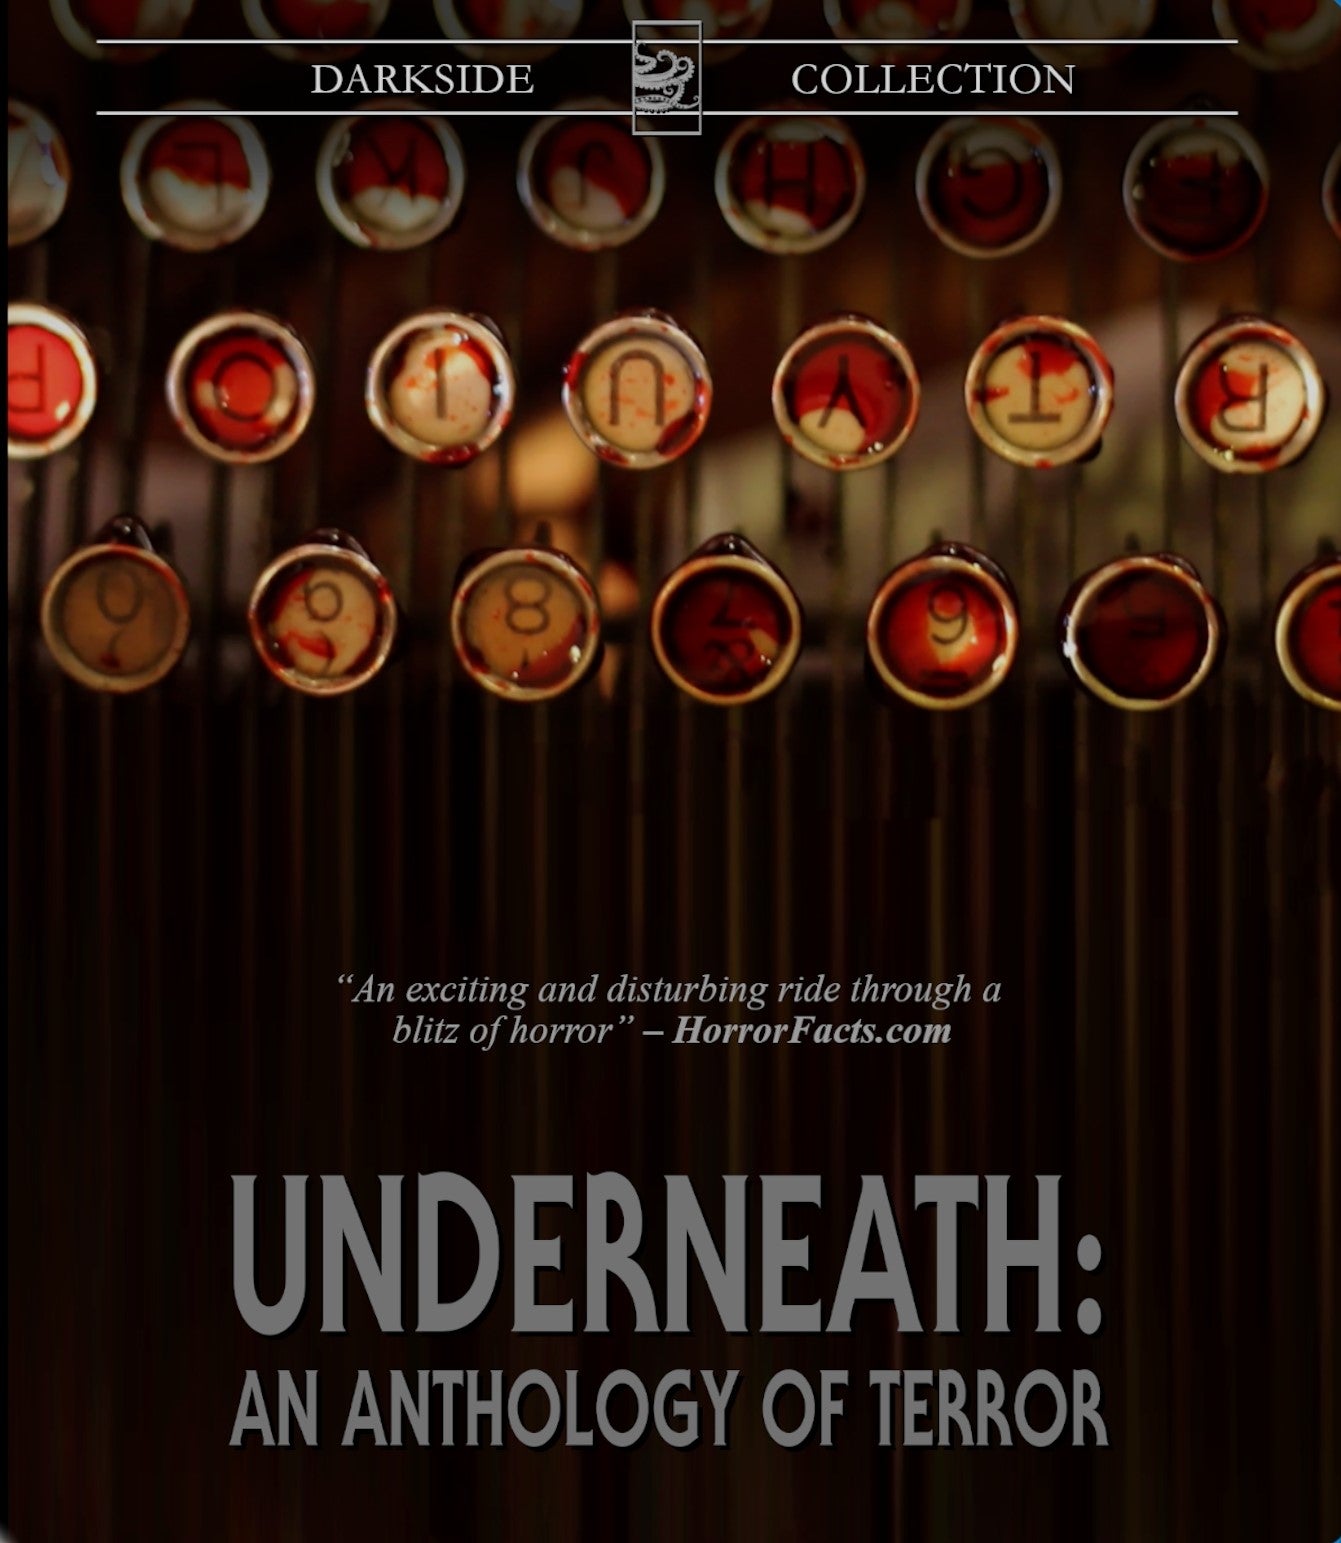 UNDERNEATH: AN ANTHOLOGY OF TERROR BLU-RAY